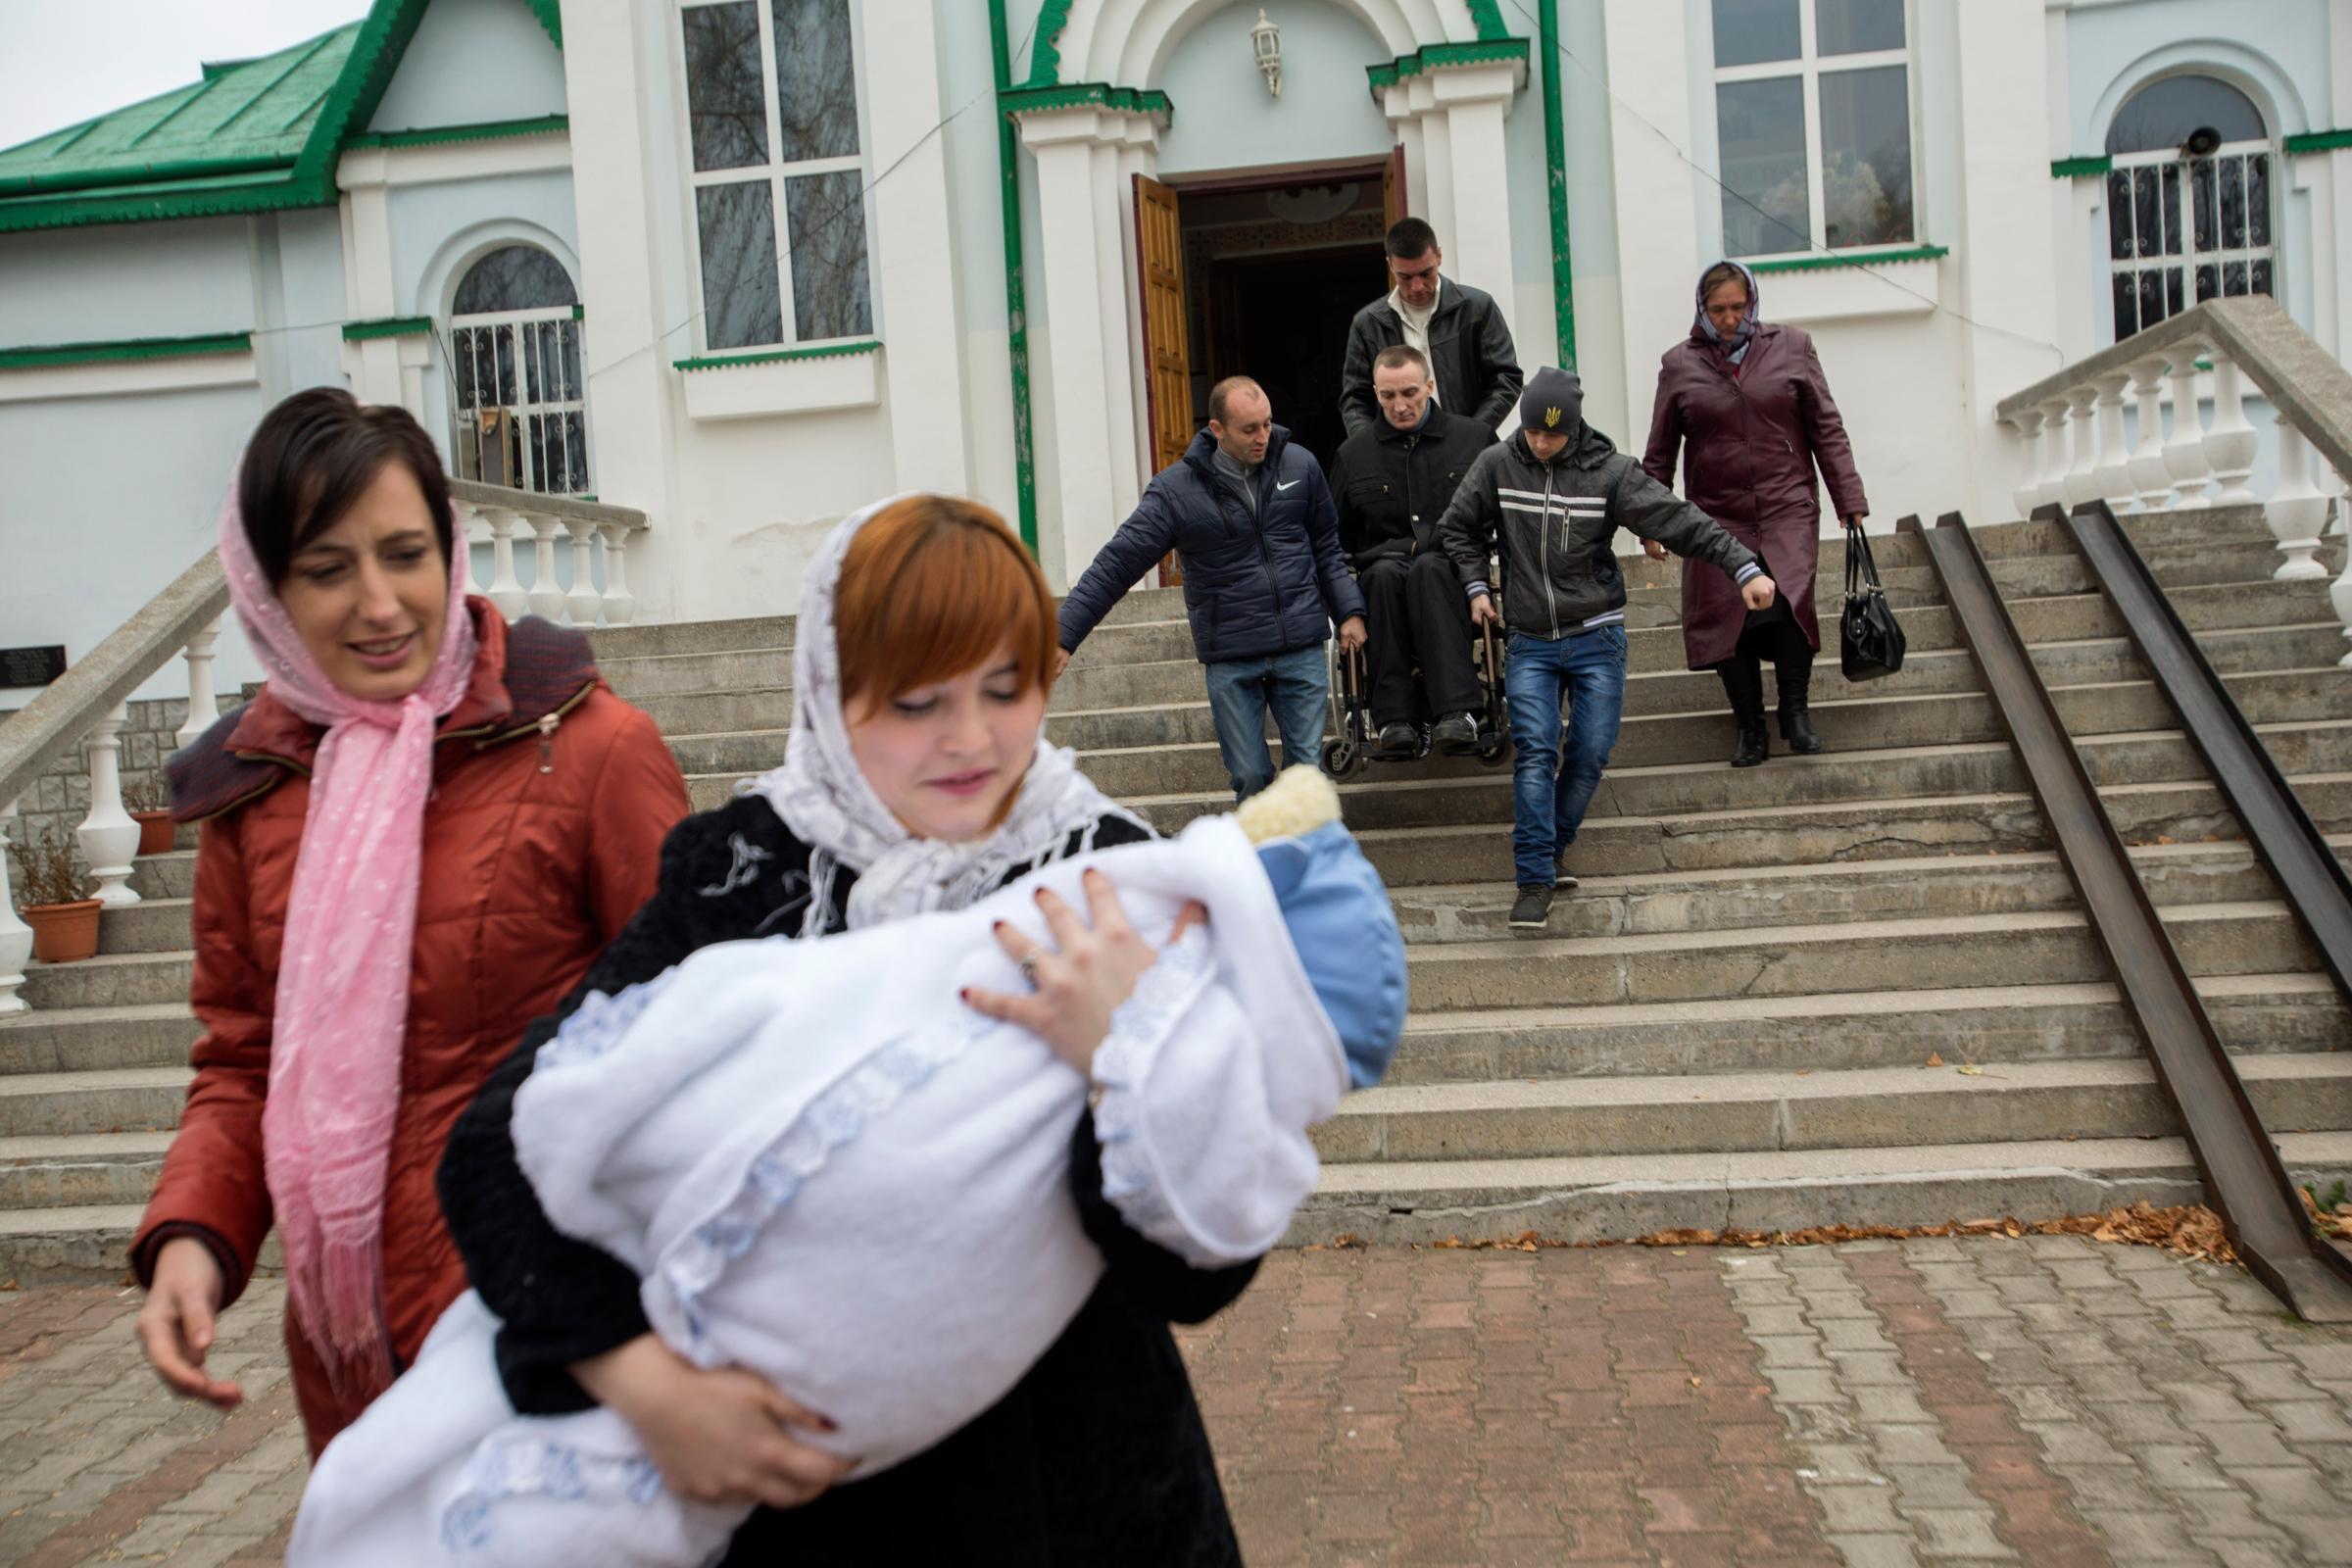 Honcharovsky is assisted down a set of stairs after his son's christening at a church in Teofipol, Ukraine, Nov. 16, 2014. Proper infrastructure for the physically disabled barely exists in some Ukrainian cities, towns and villages.